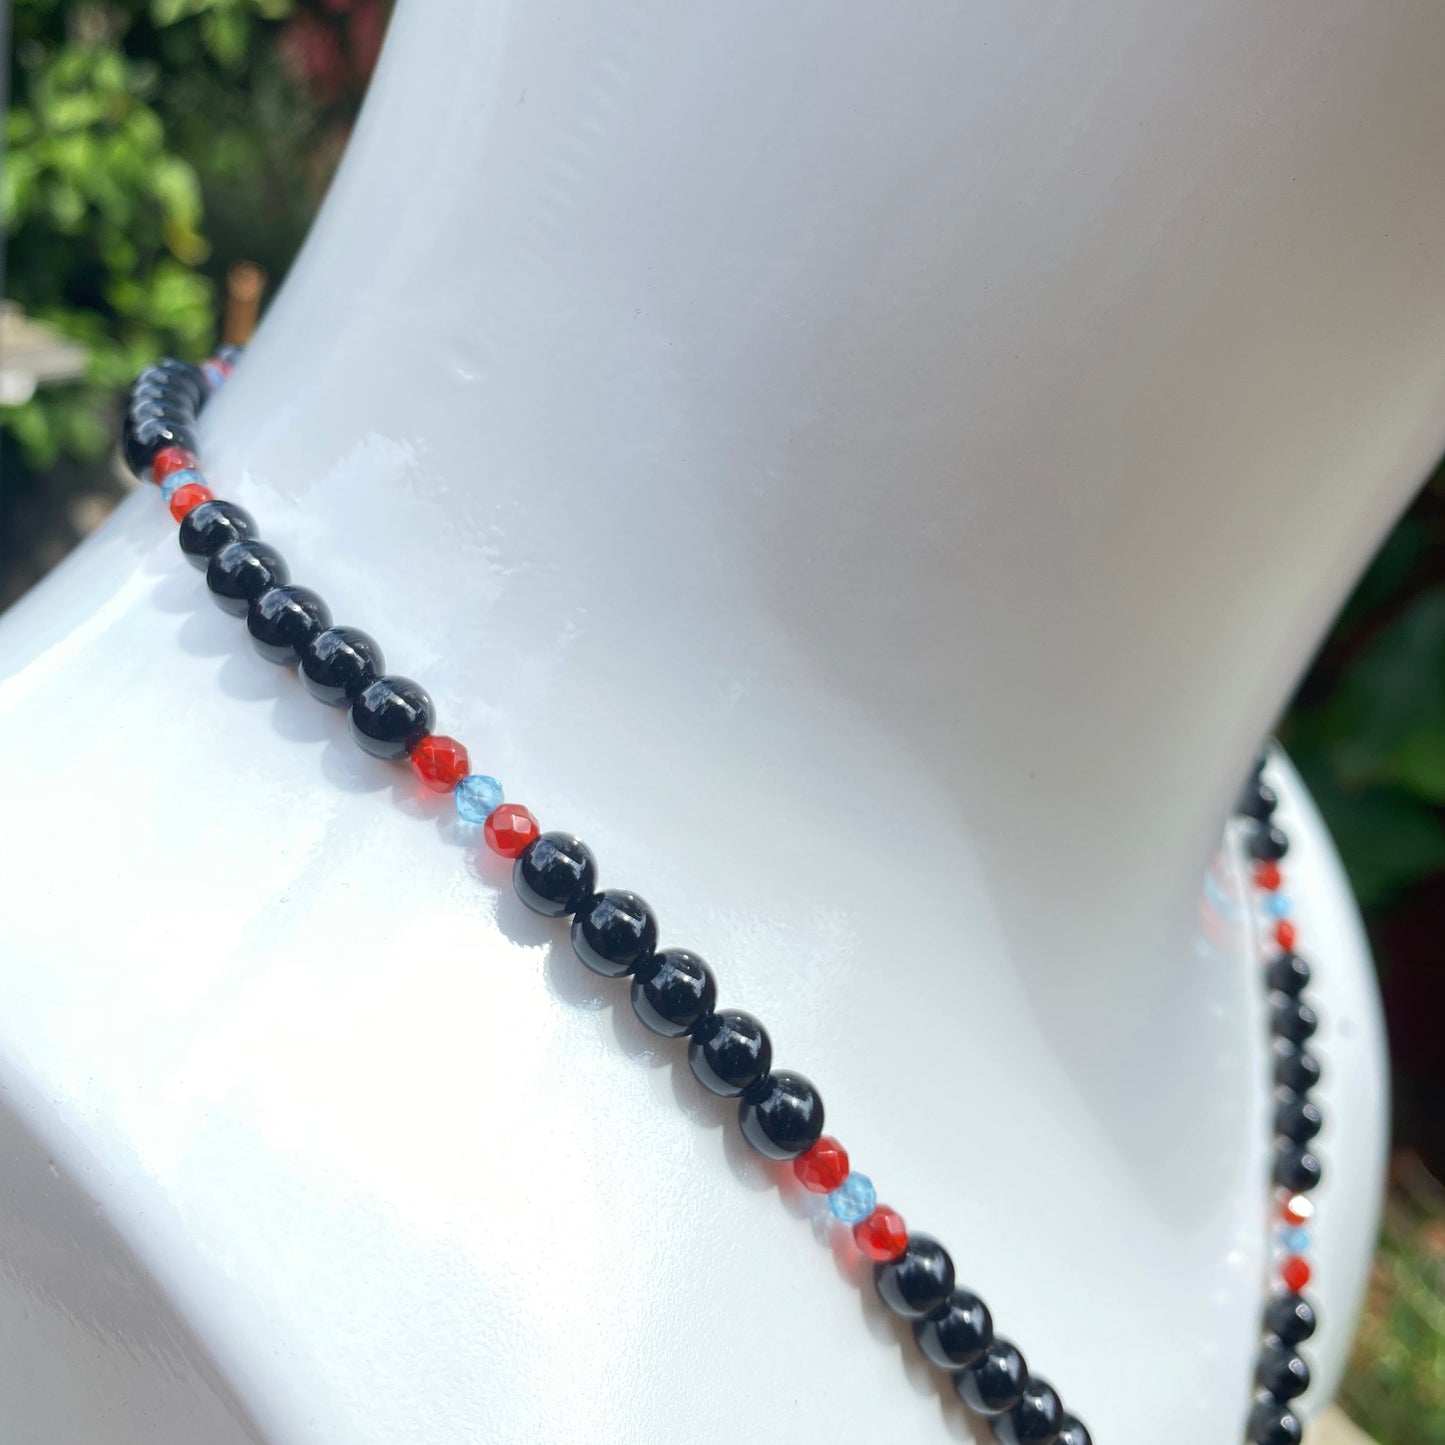 Unisex Agate moon on Onyx, Red Agate, Blue Topaz Gemstone Necklace